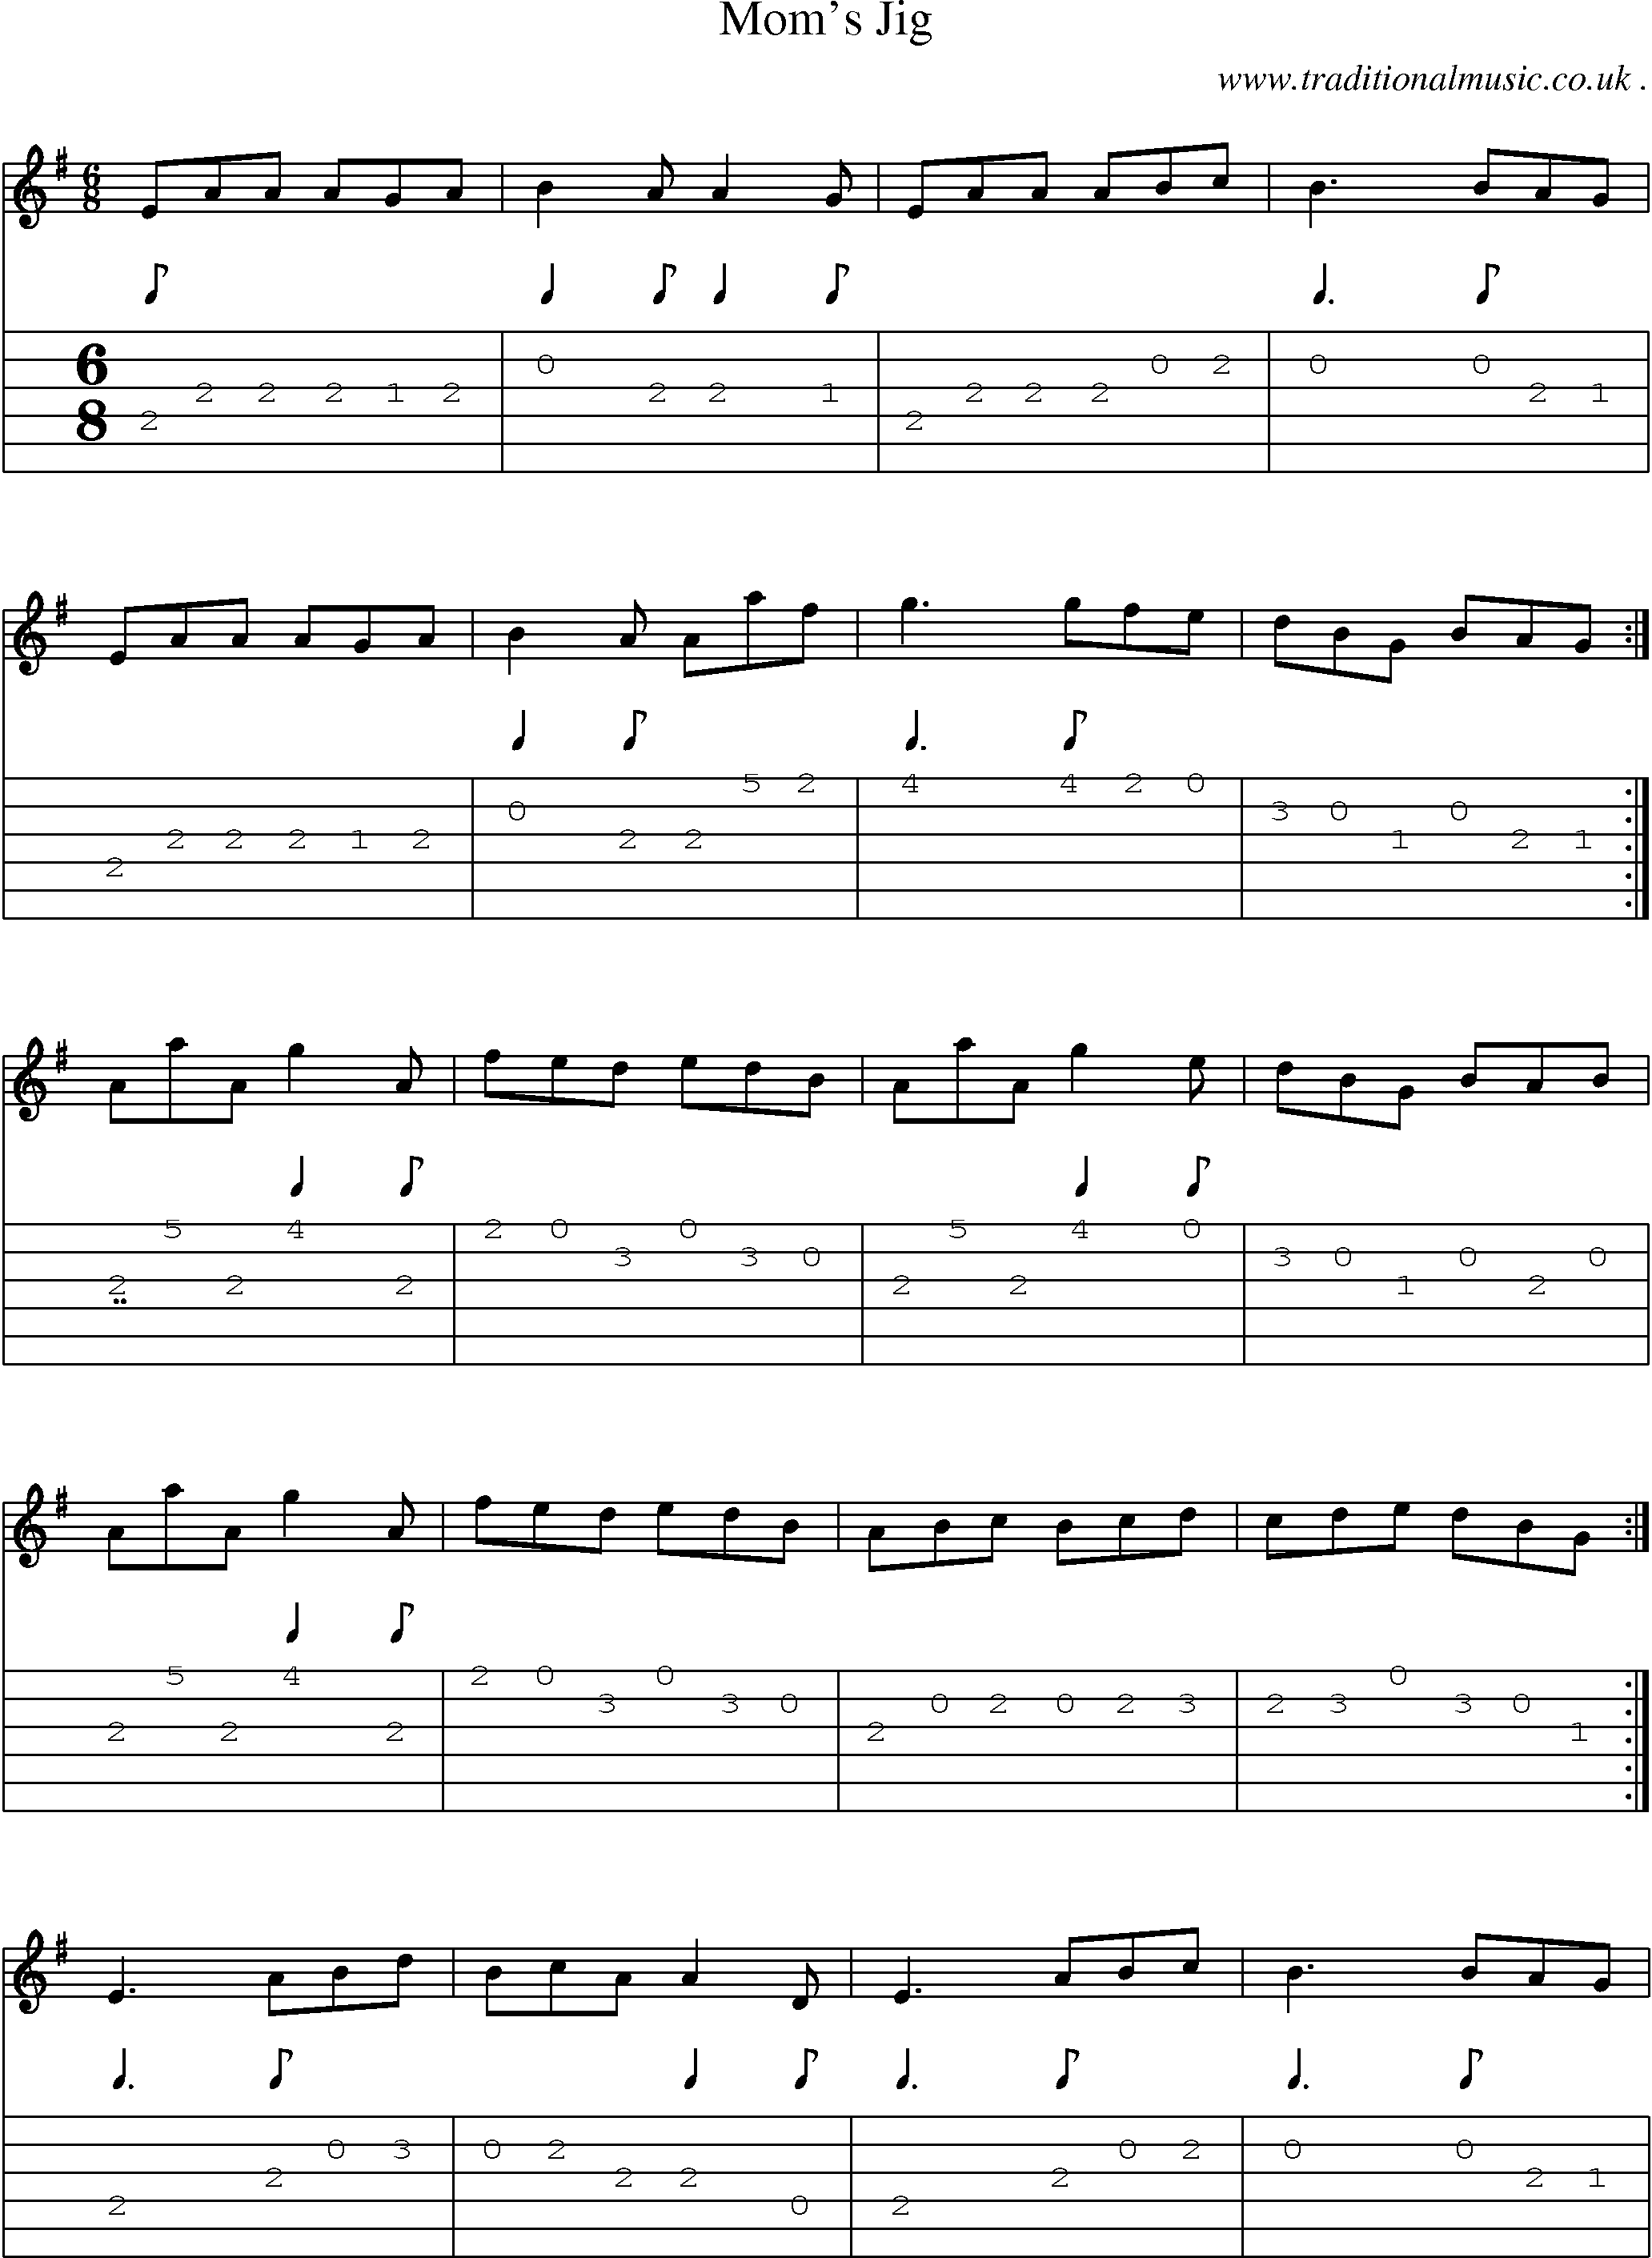 Sheet-Music and Guitar Tabs for Moms Jig